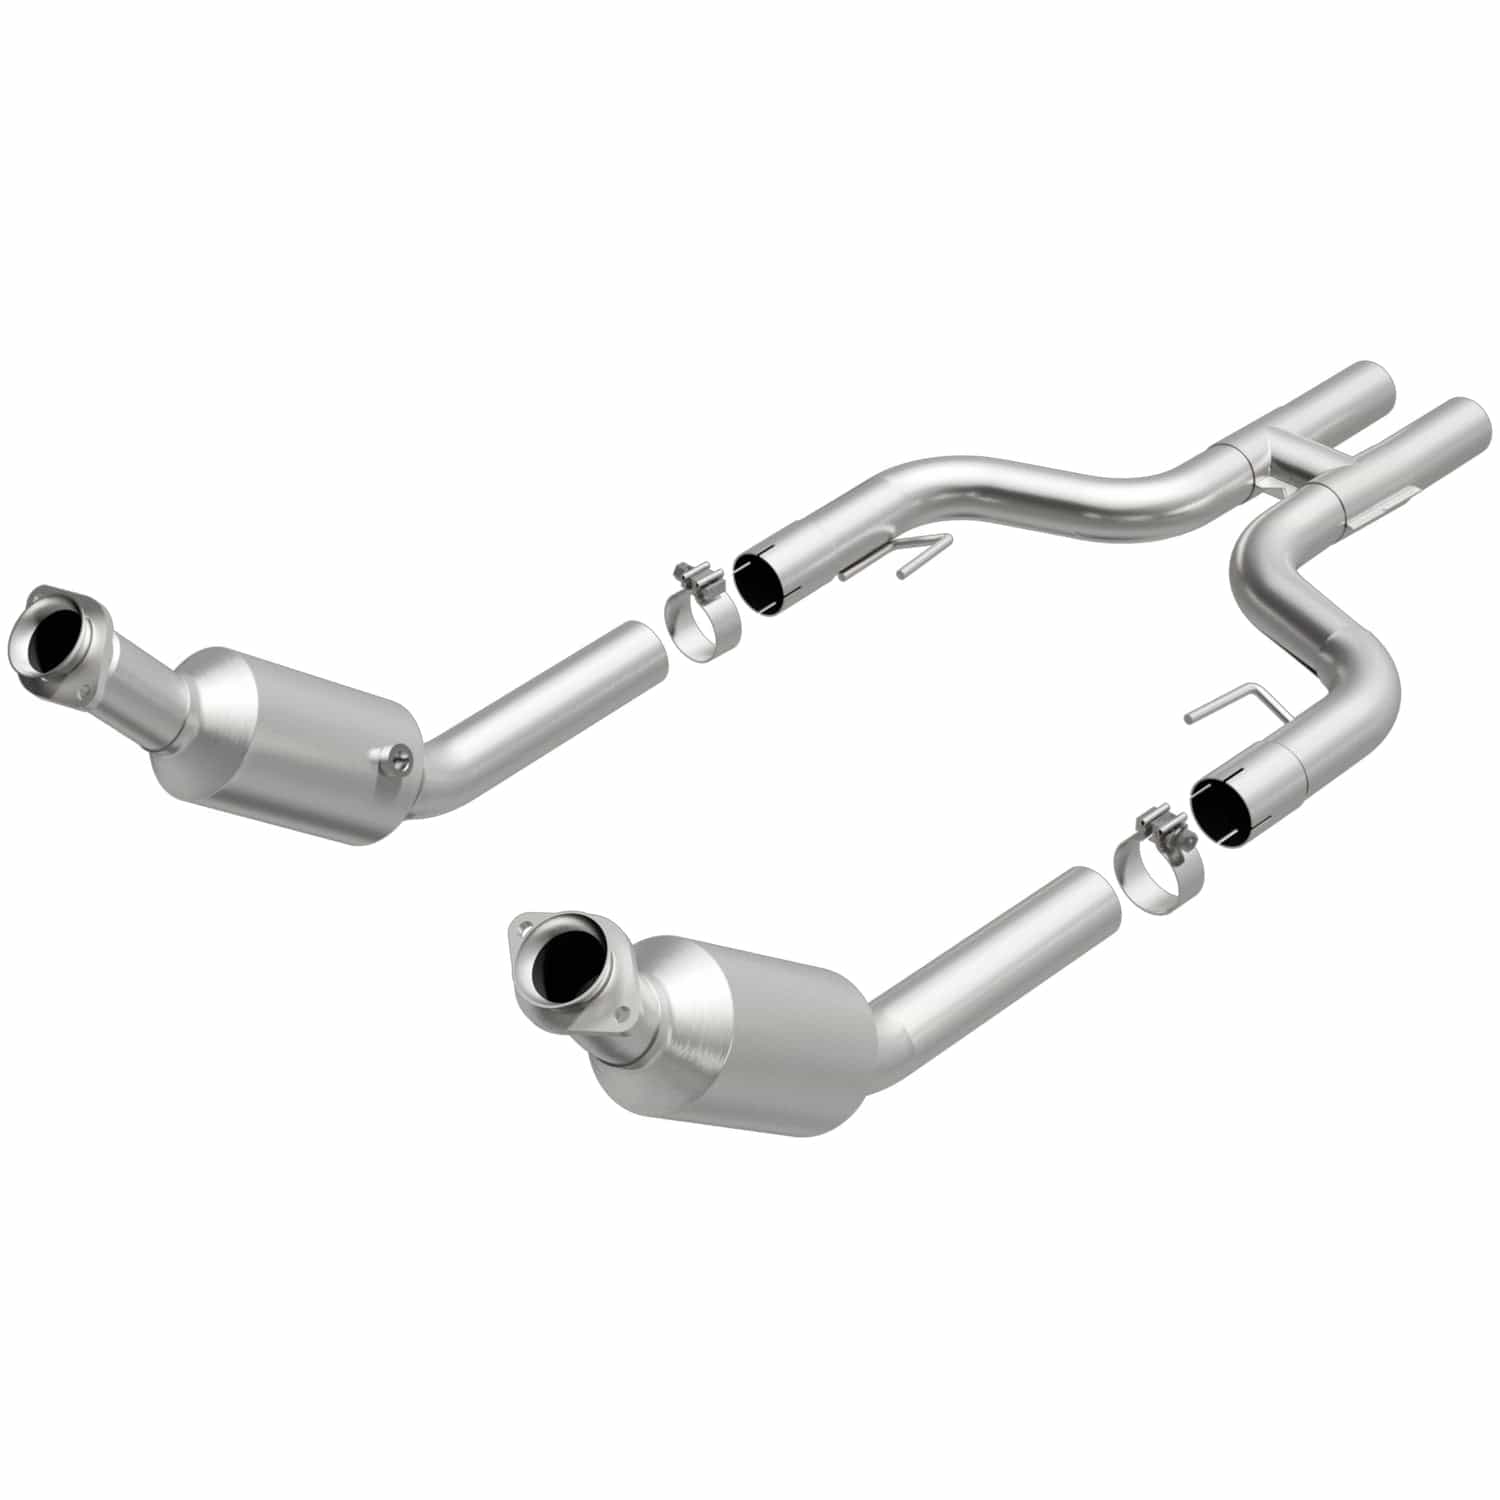 MagnaFlow 2005-2010 Ford Mustang HM Grade Federal / EPA Compliant